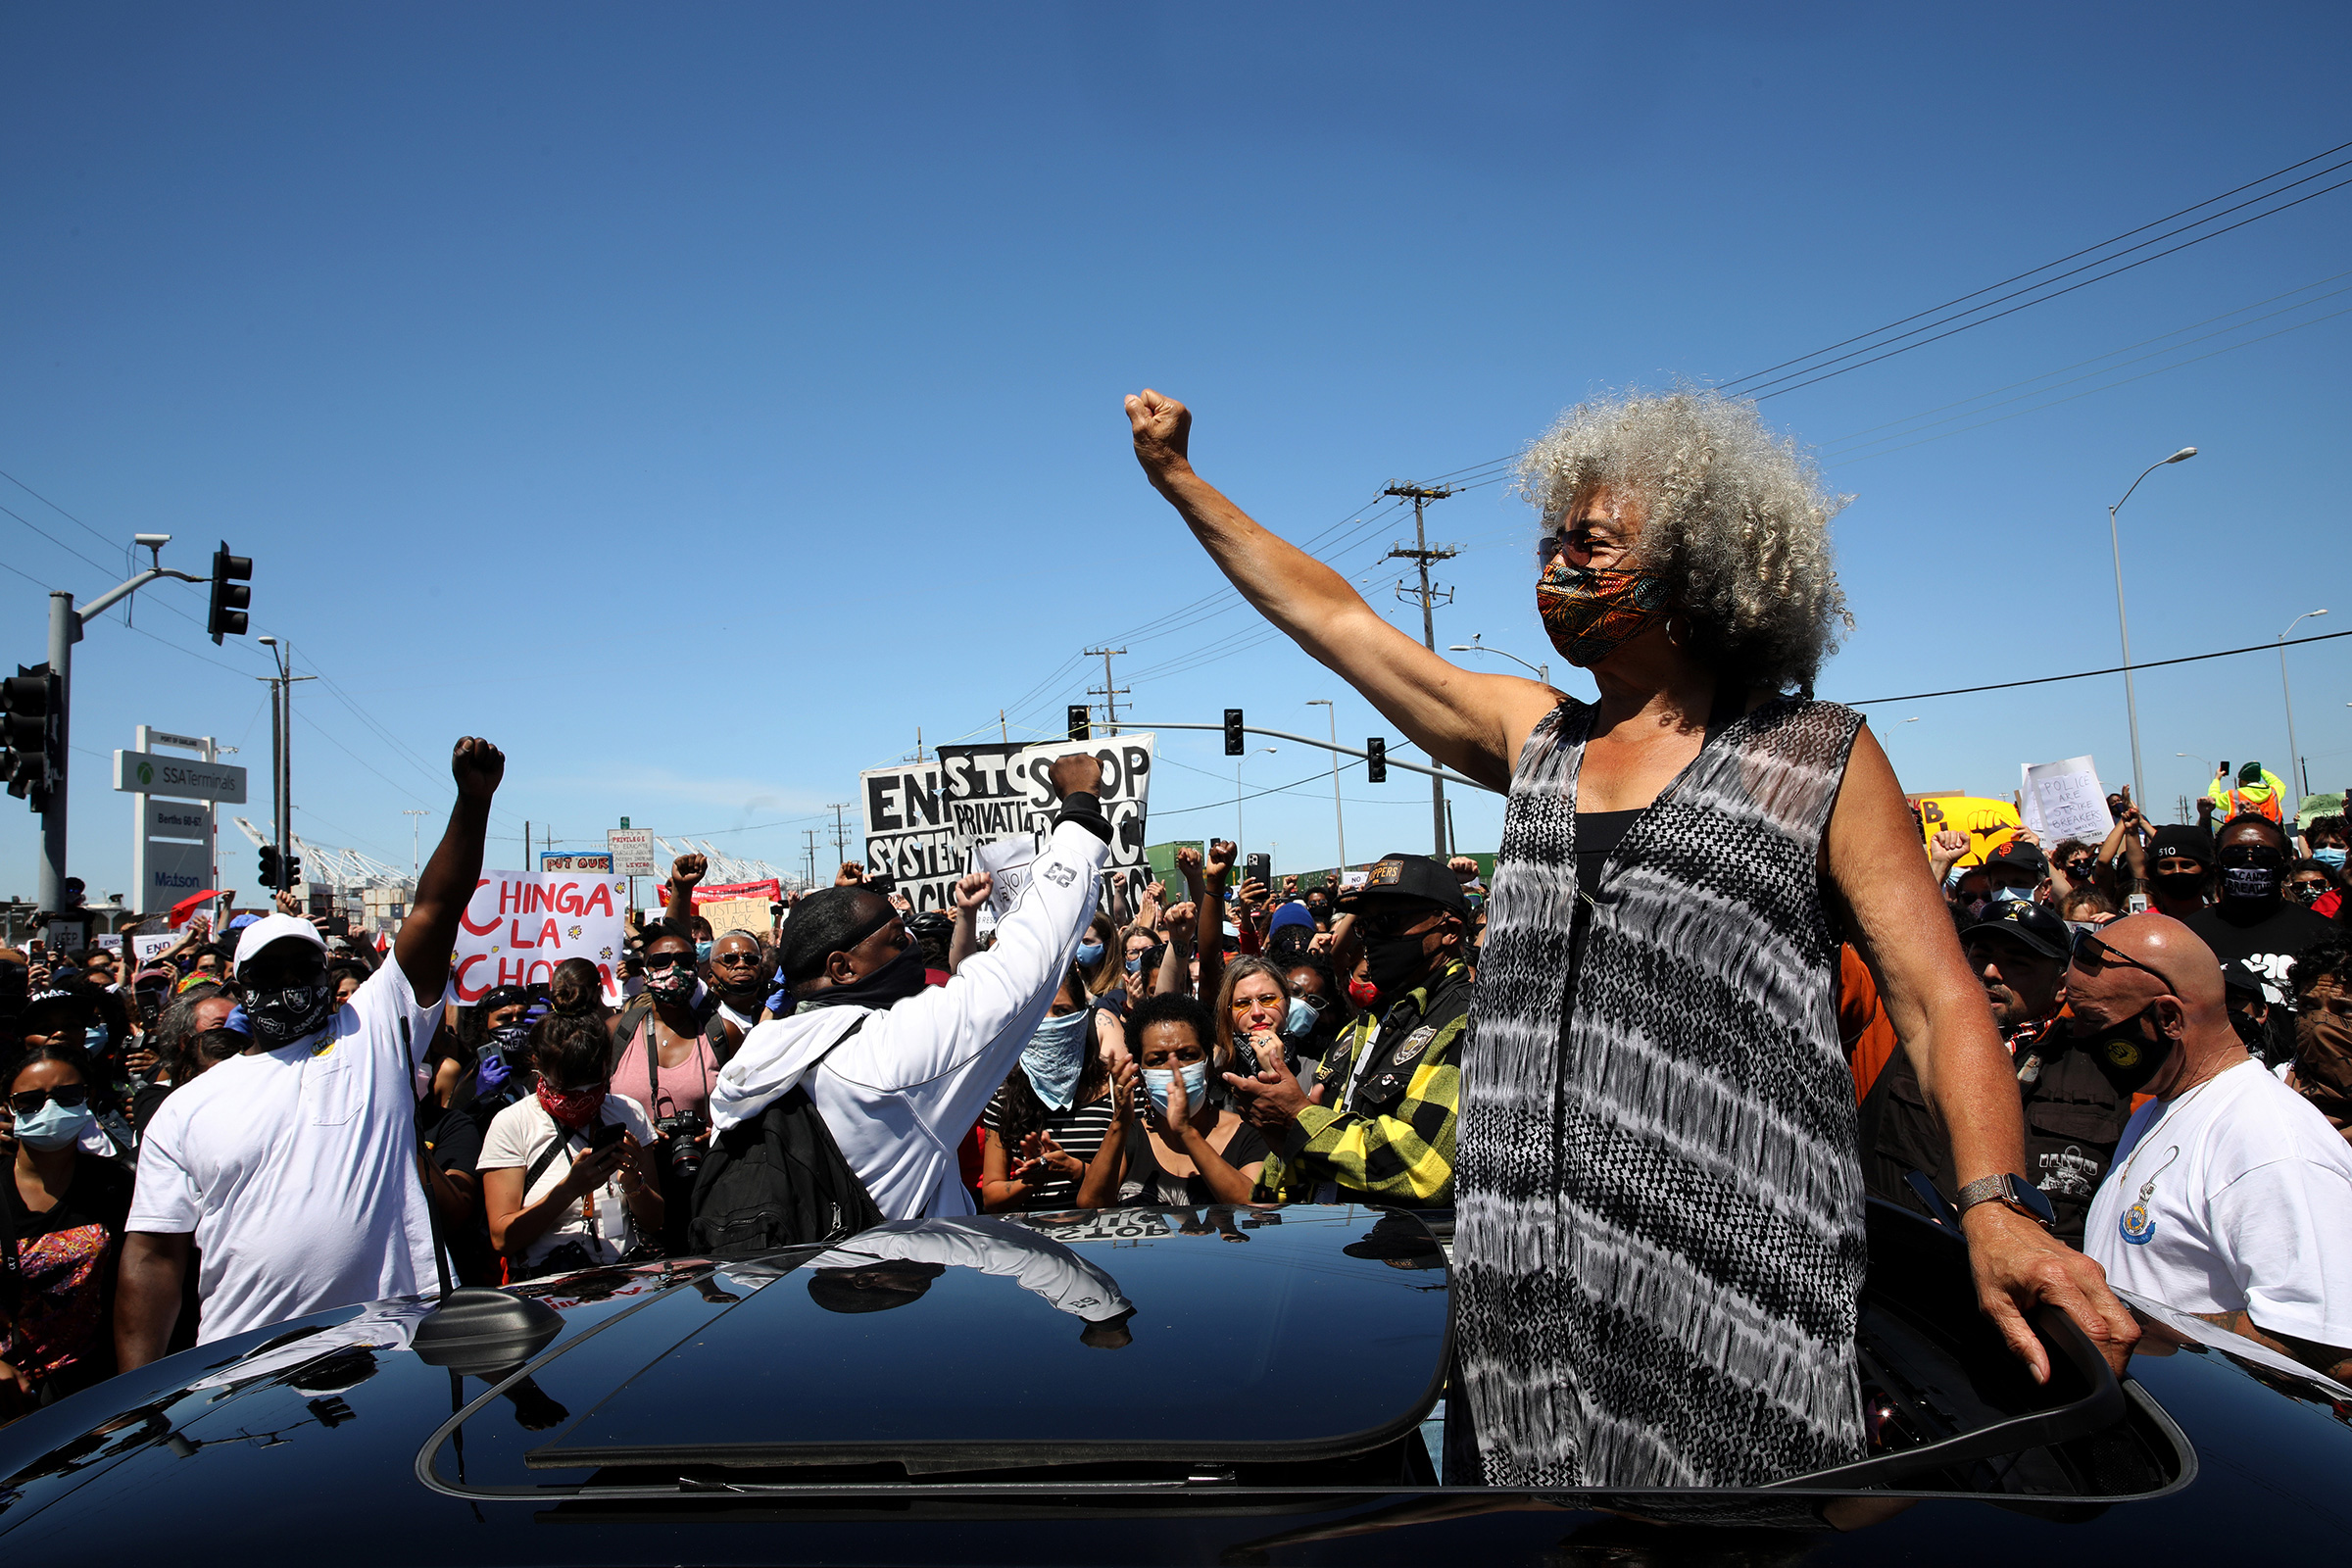 Civil rights leader Angela Davis raises her fist during a Juneteenth protest against police brutality in Oakland, Calif., on June 19, 2020. (Yalonda M. James—The San Francisco Chronicle/Getty Images)